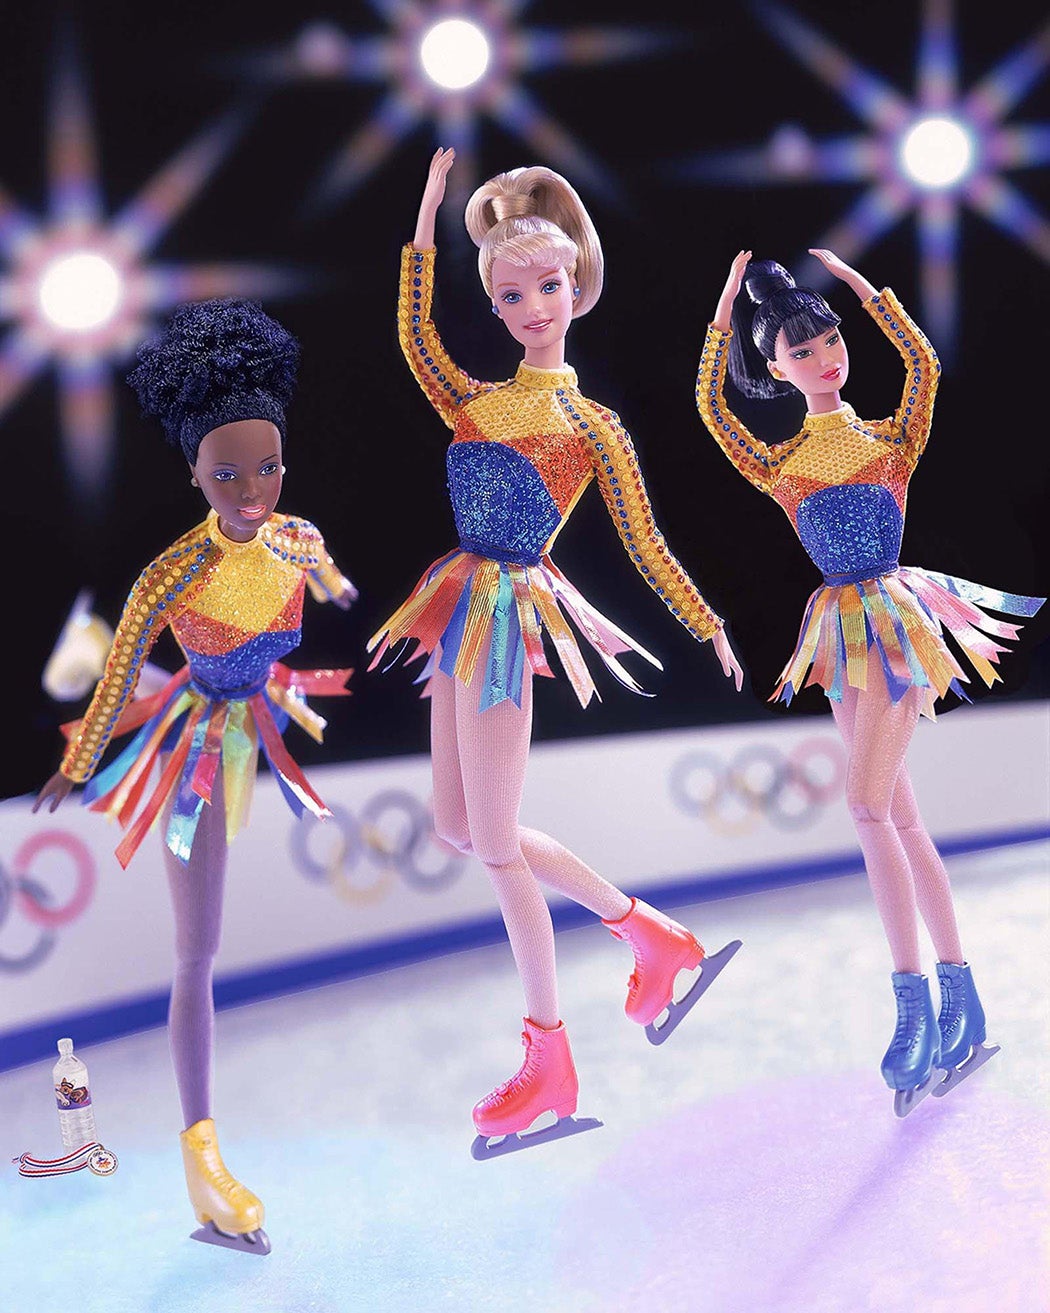 Mattel's Star Skater Barbie. The doll is advertised as an ice skater who can really twirl and skate as she performs in the Salt Lake City 2002 Olympic Winter Games.